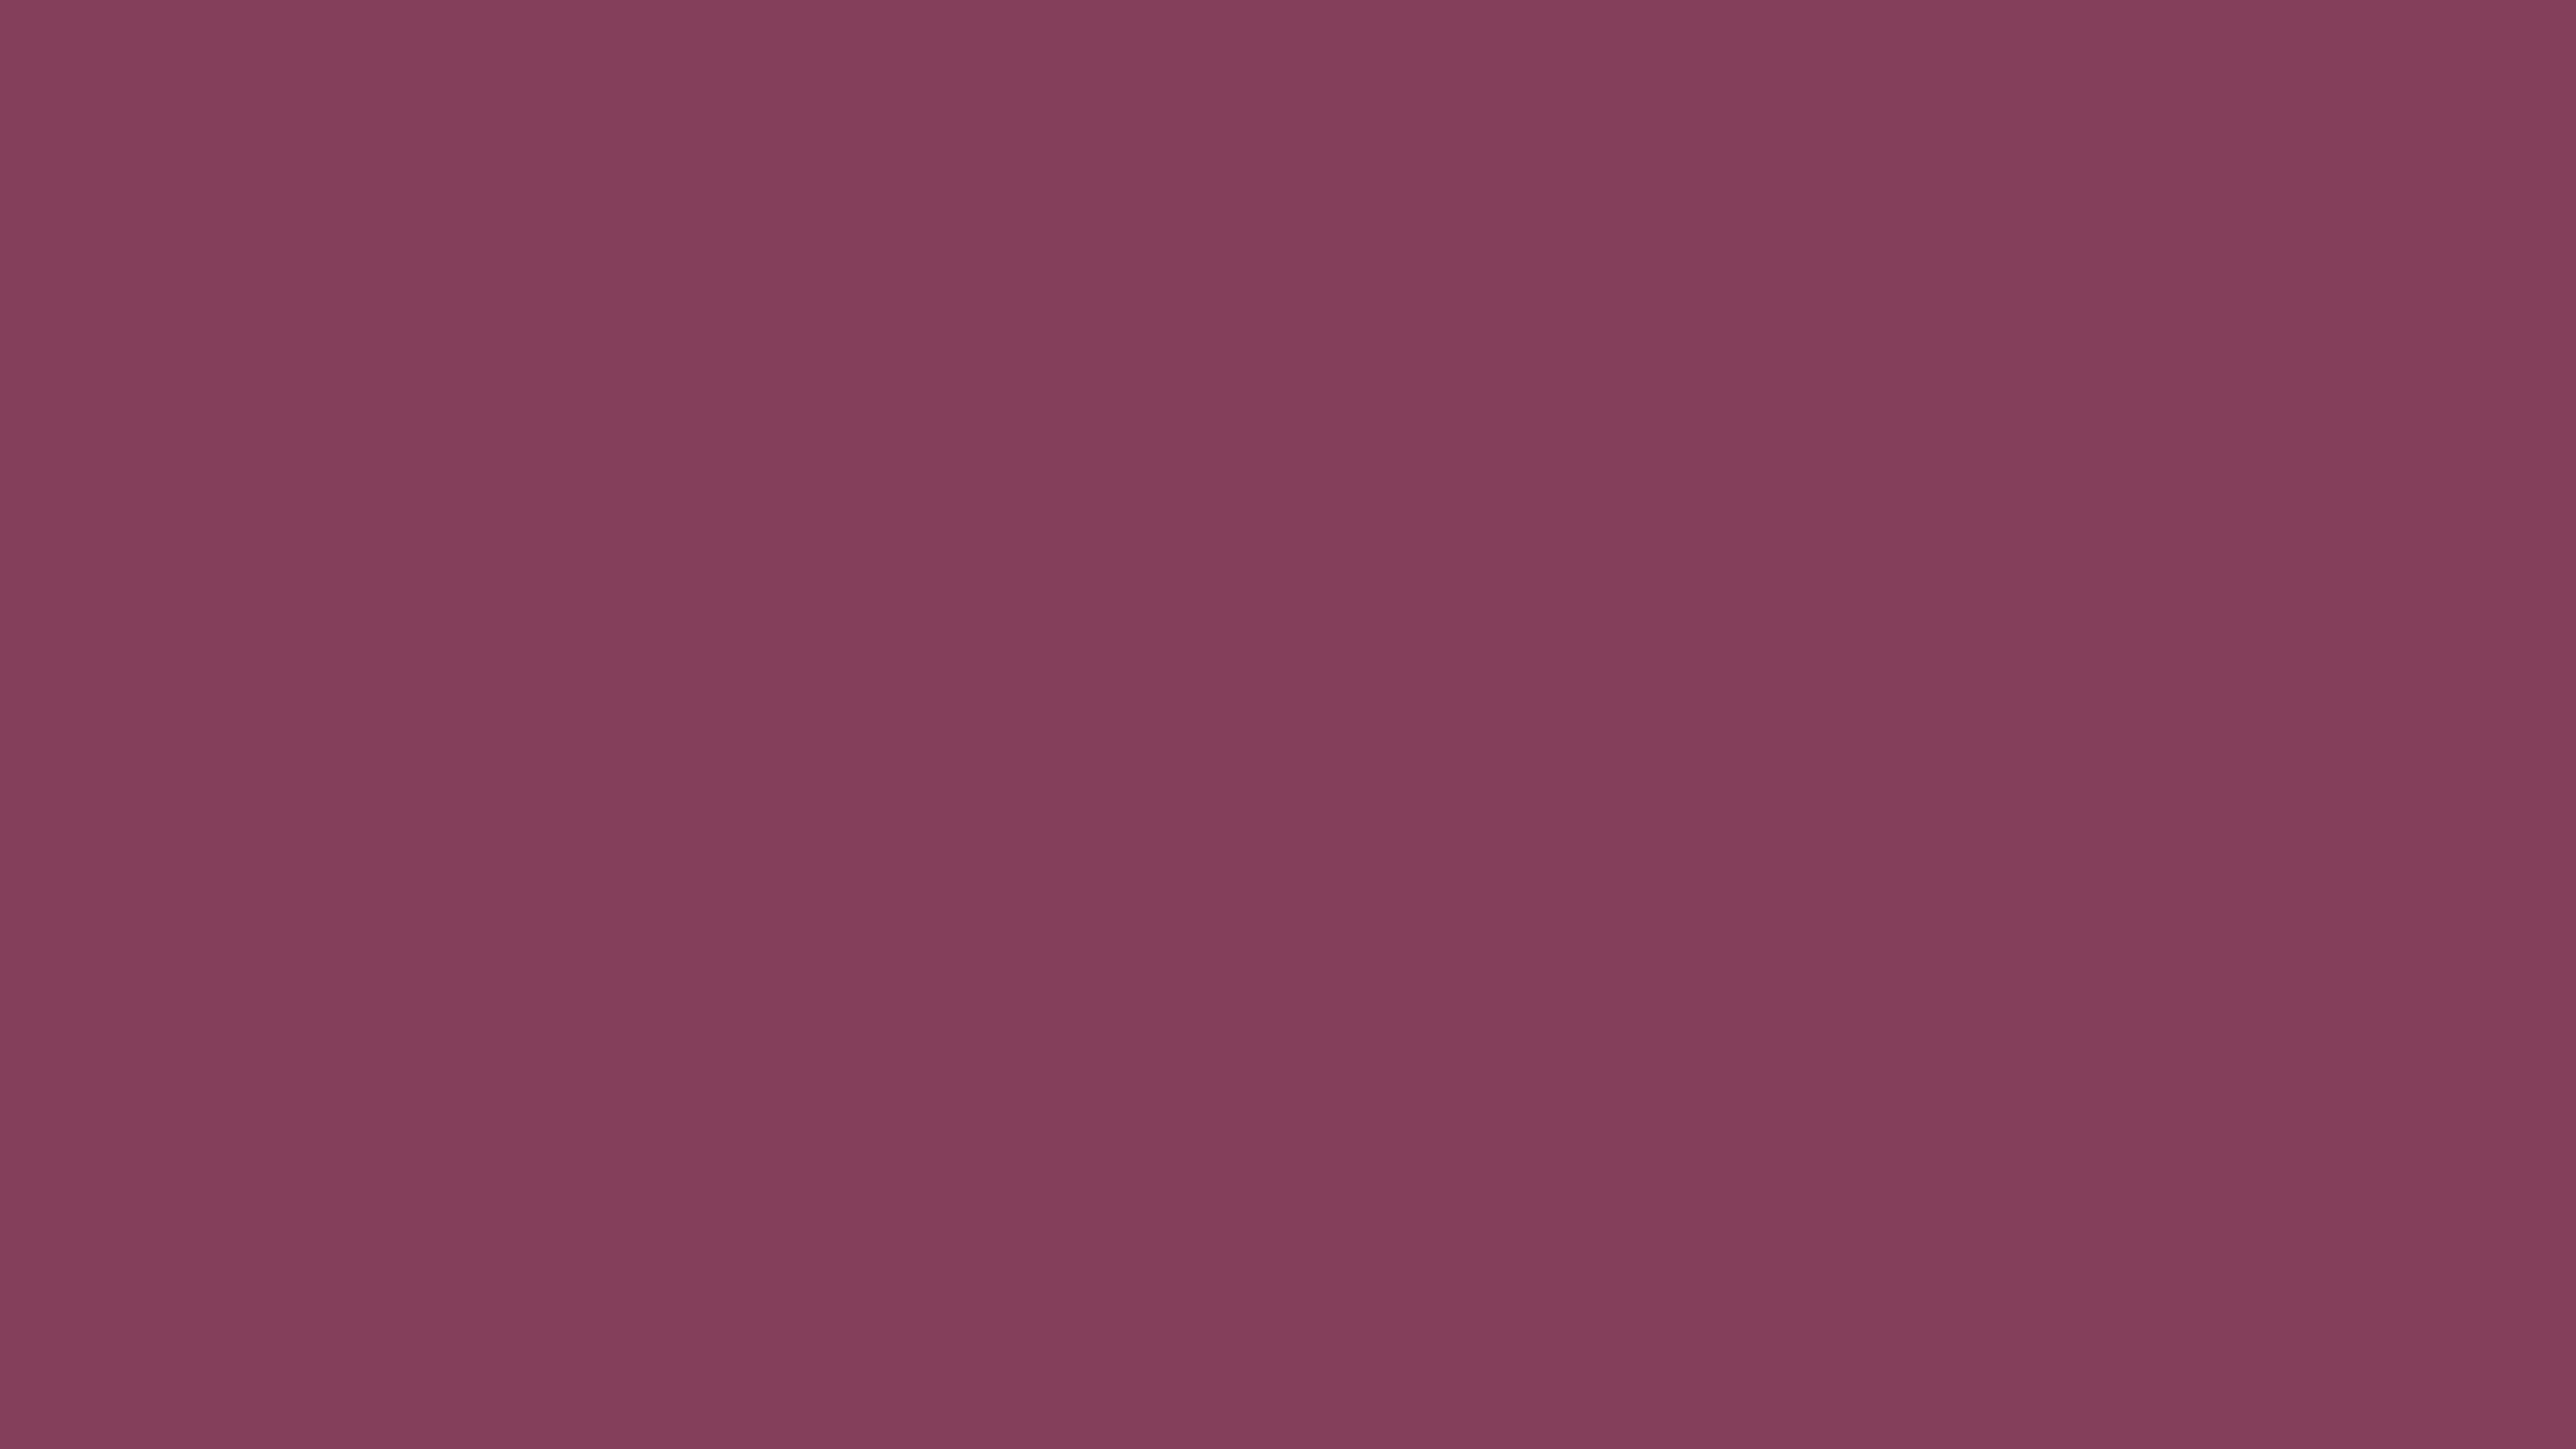 7680x4320 Deep Ruby Solid Color Background